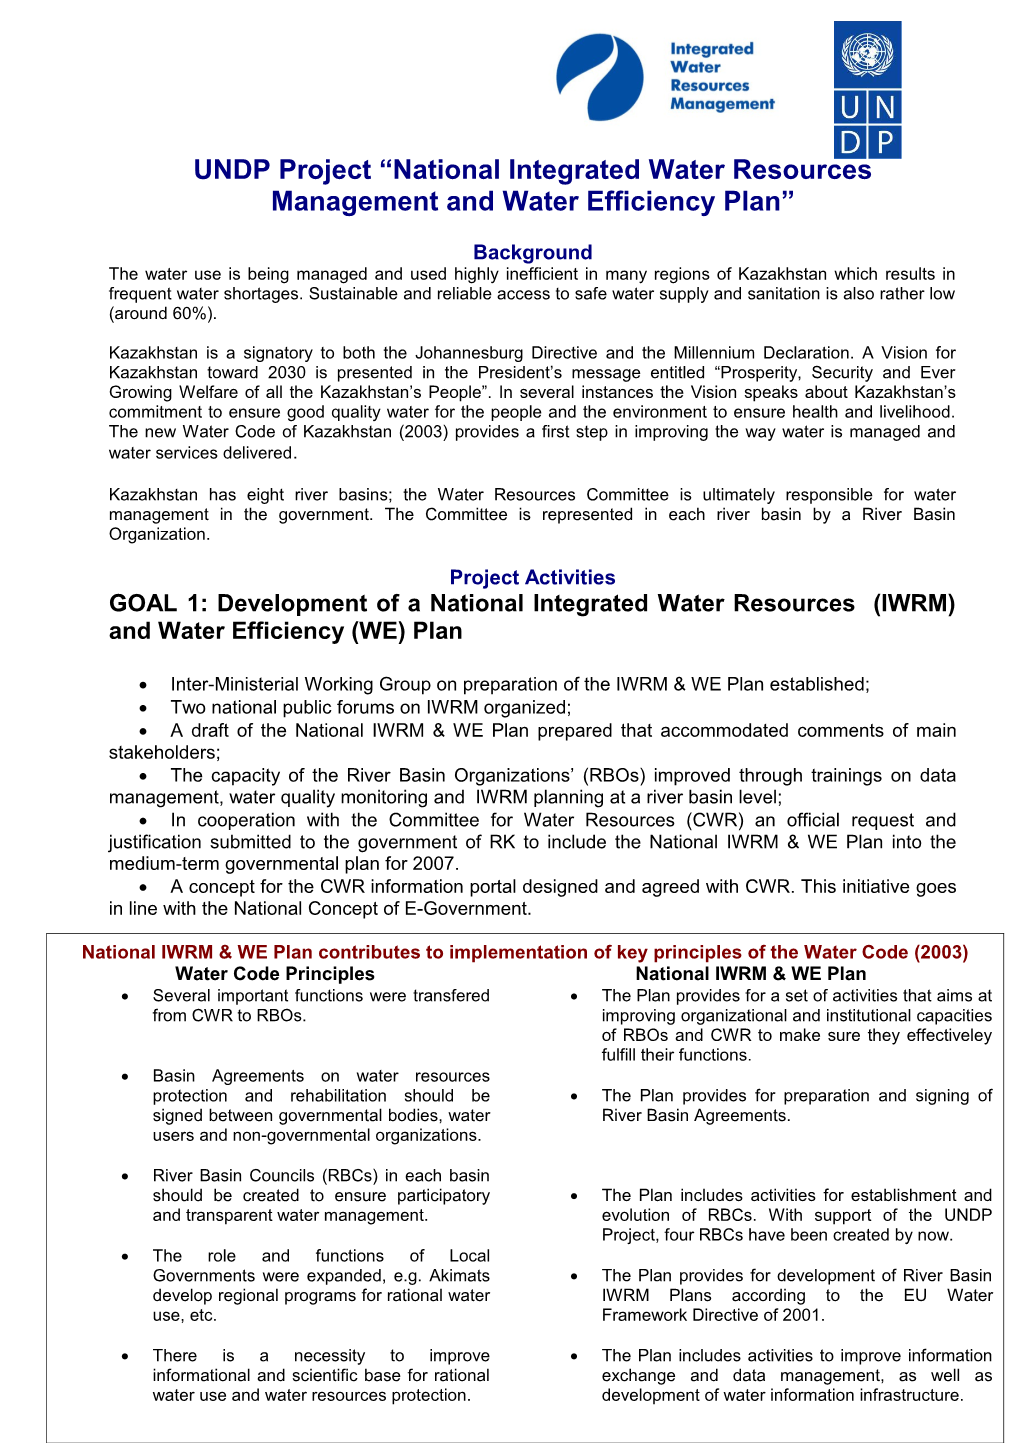 UNDP Project National Integrated Water Resources Management and Water Efficiency Plan